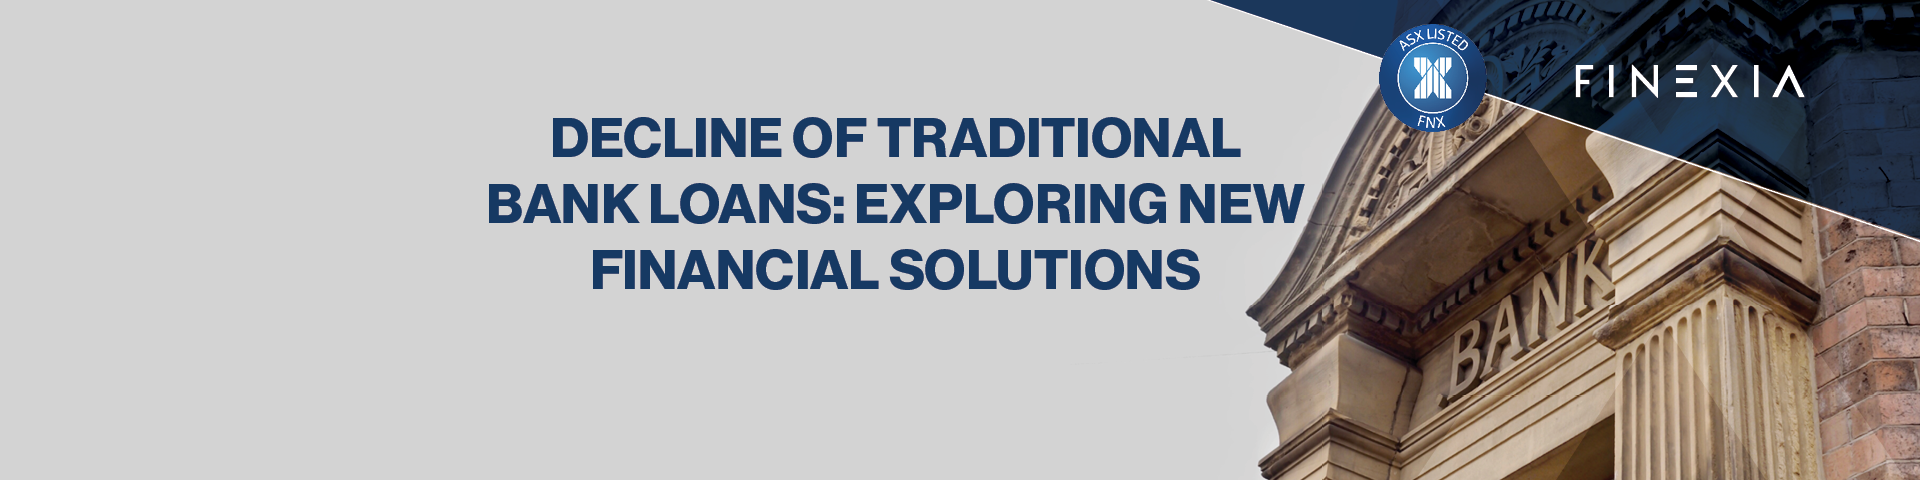 Decline of Traditional Bank Loans: Exploring New Financial Solutions